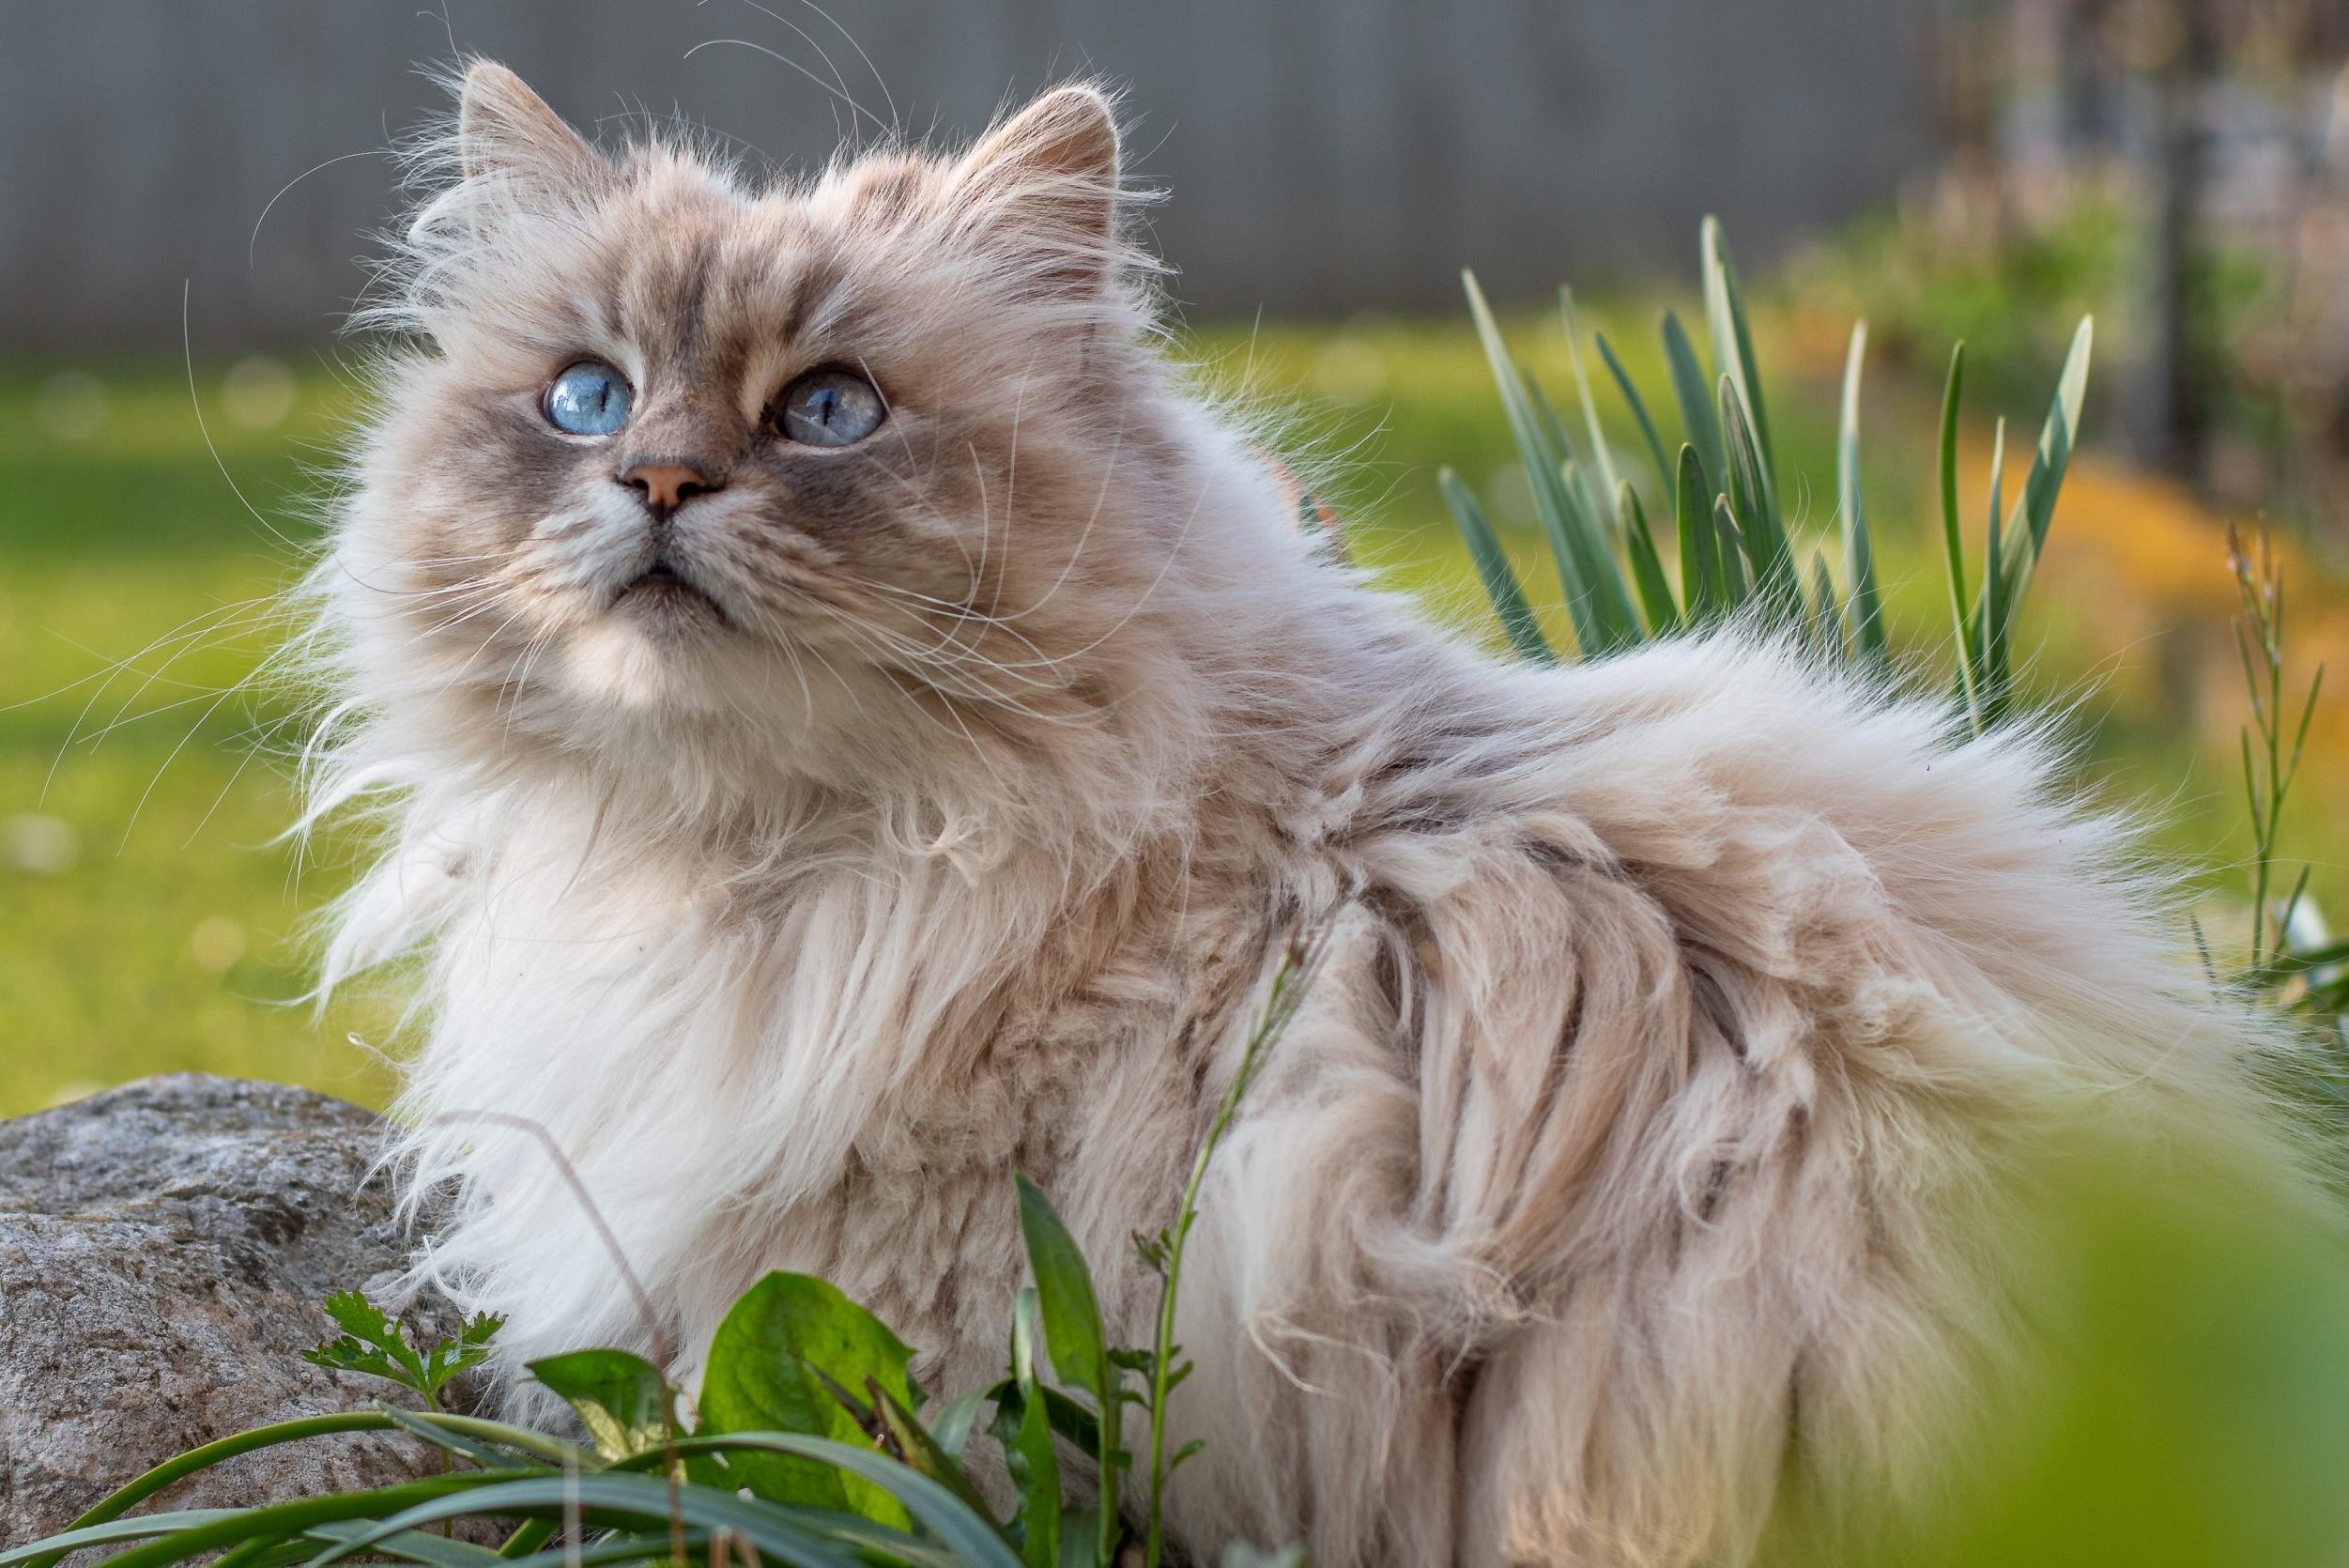 20 Black Cat Breeds — Long-haired, Fluffy, Shorthair - Parade Pets